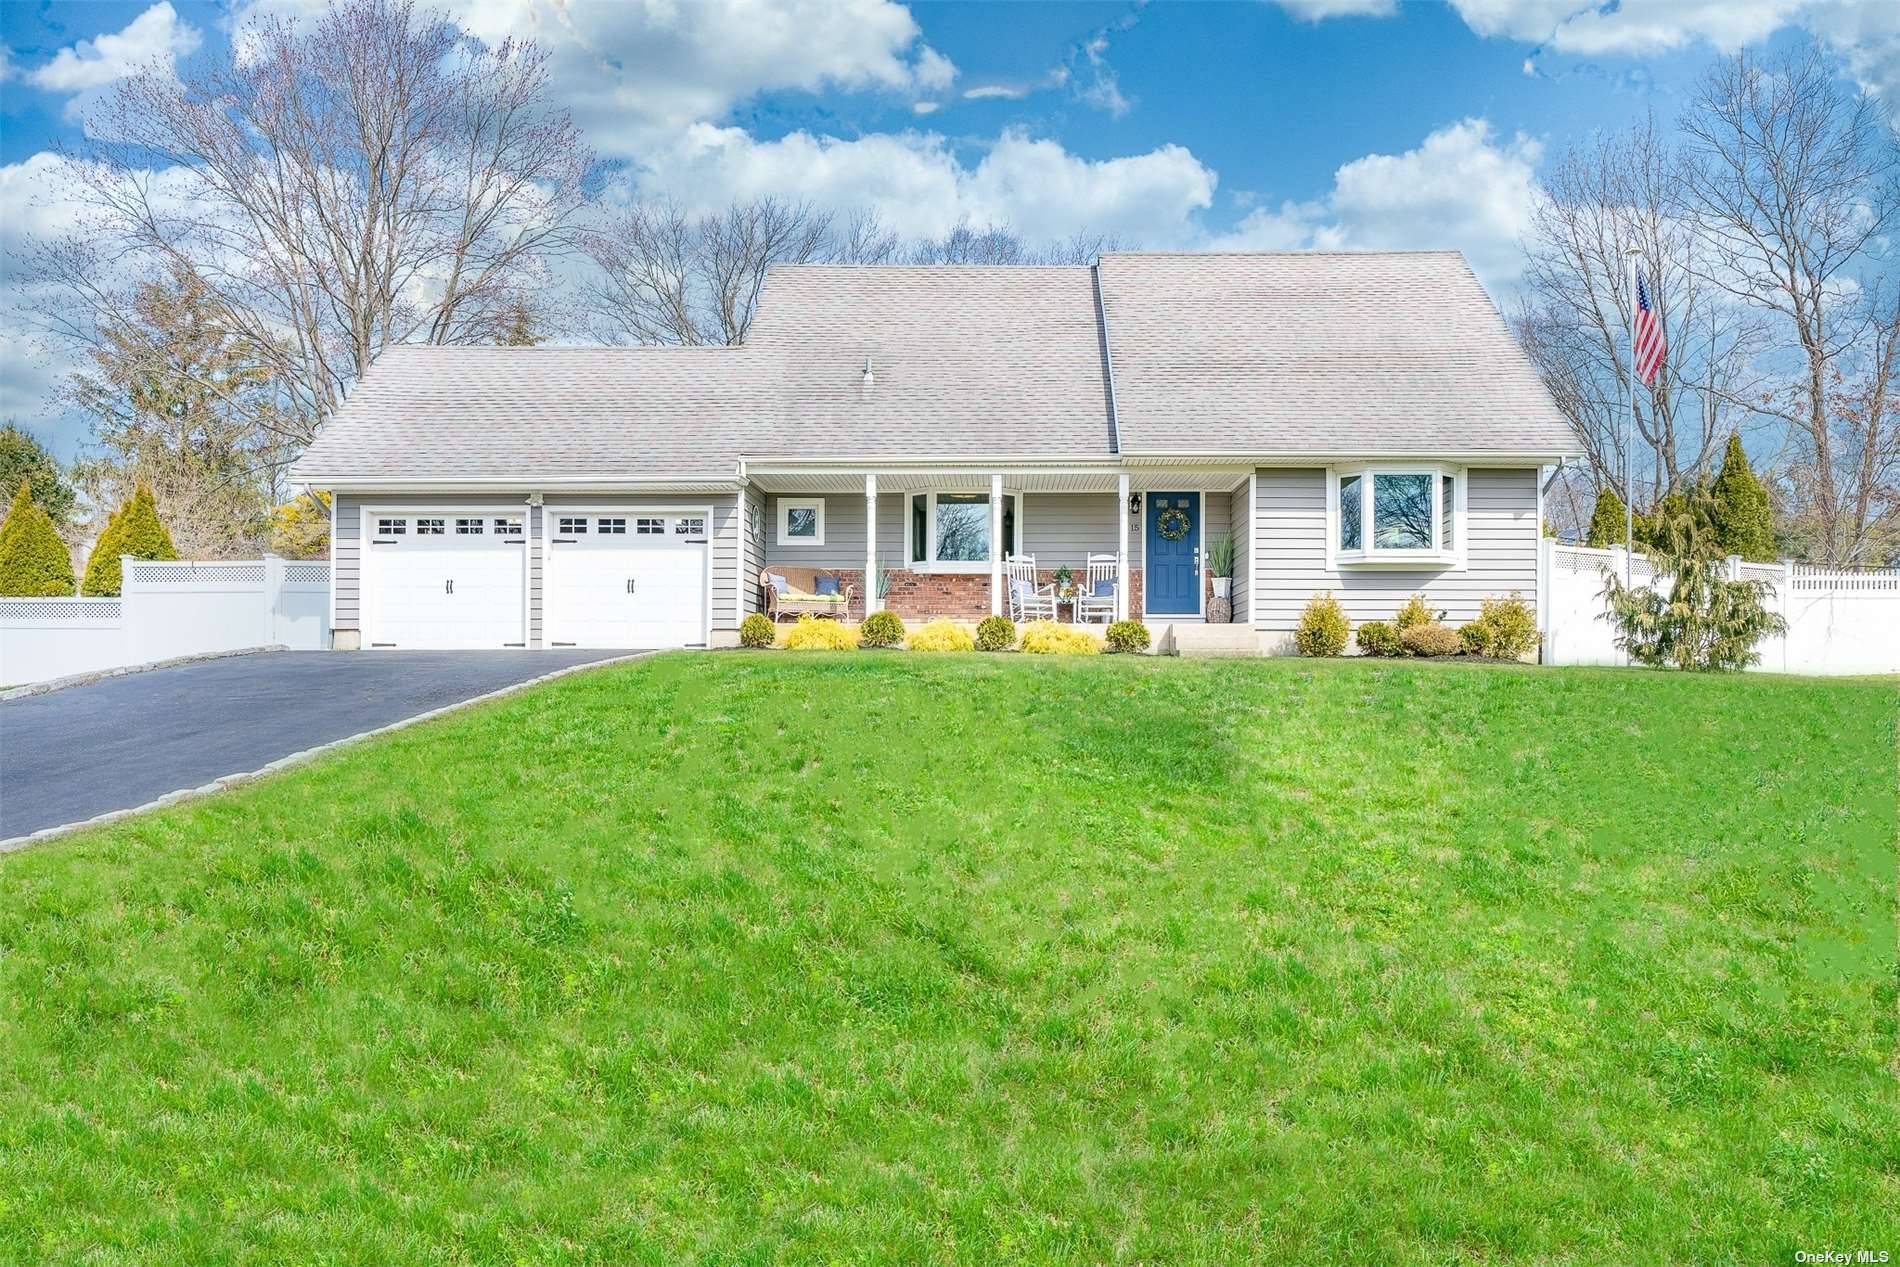 Turn The Key And Move Right In To This Diamond Colonial Situated Nicely Mid Block On Quiet Street In Nesconset Close To Gibbs Pond Park amp ; Close To Schools.